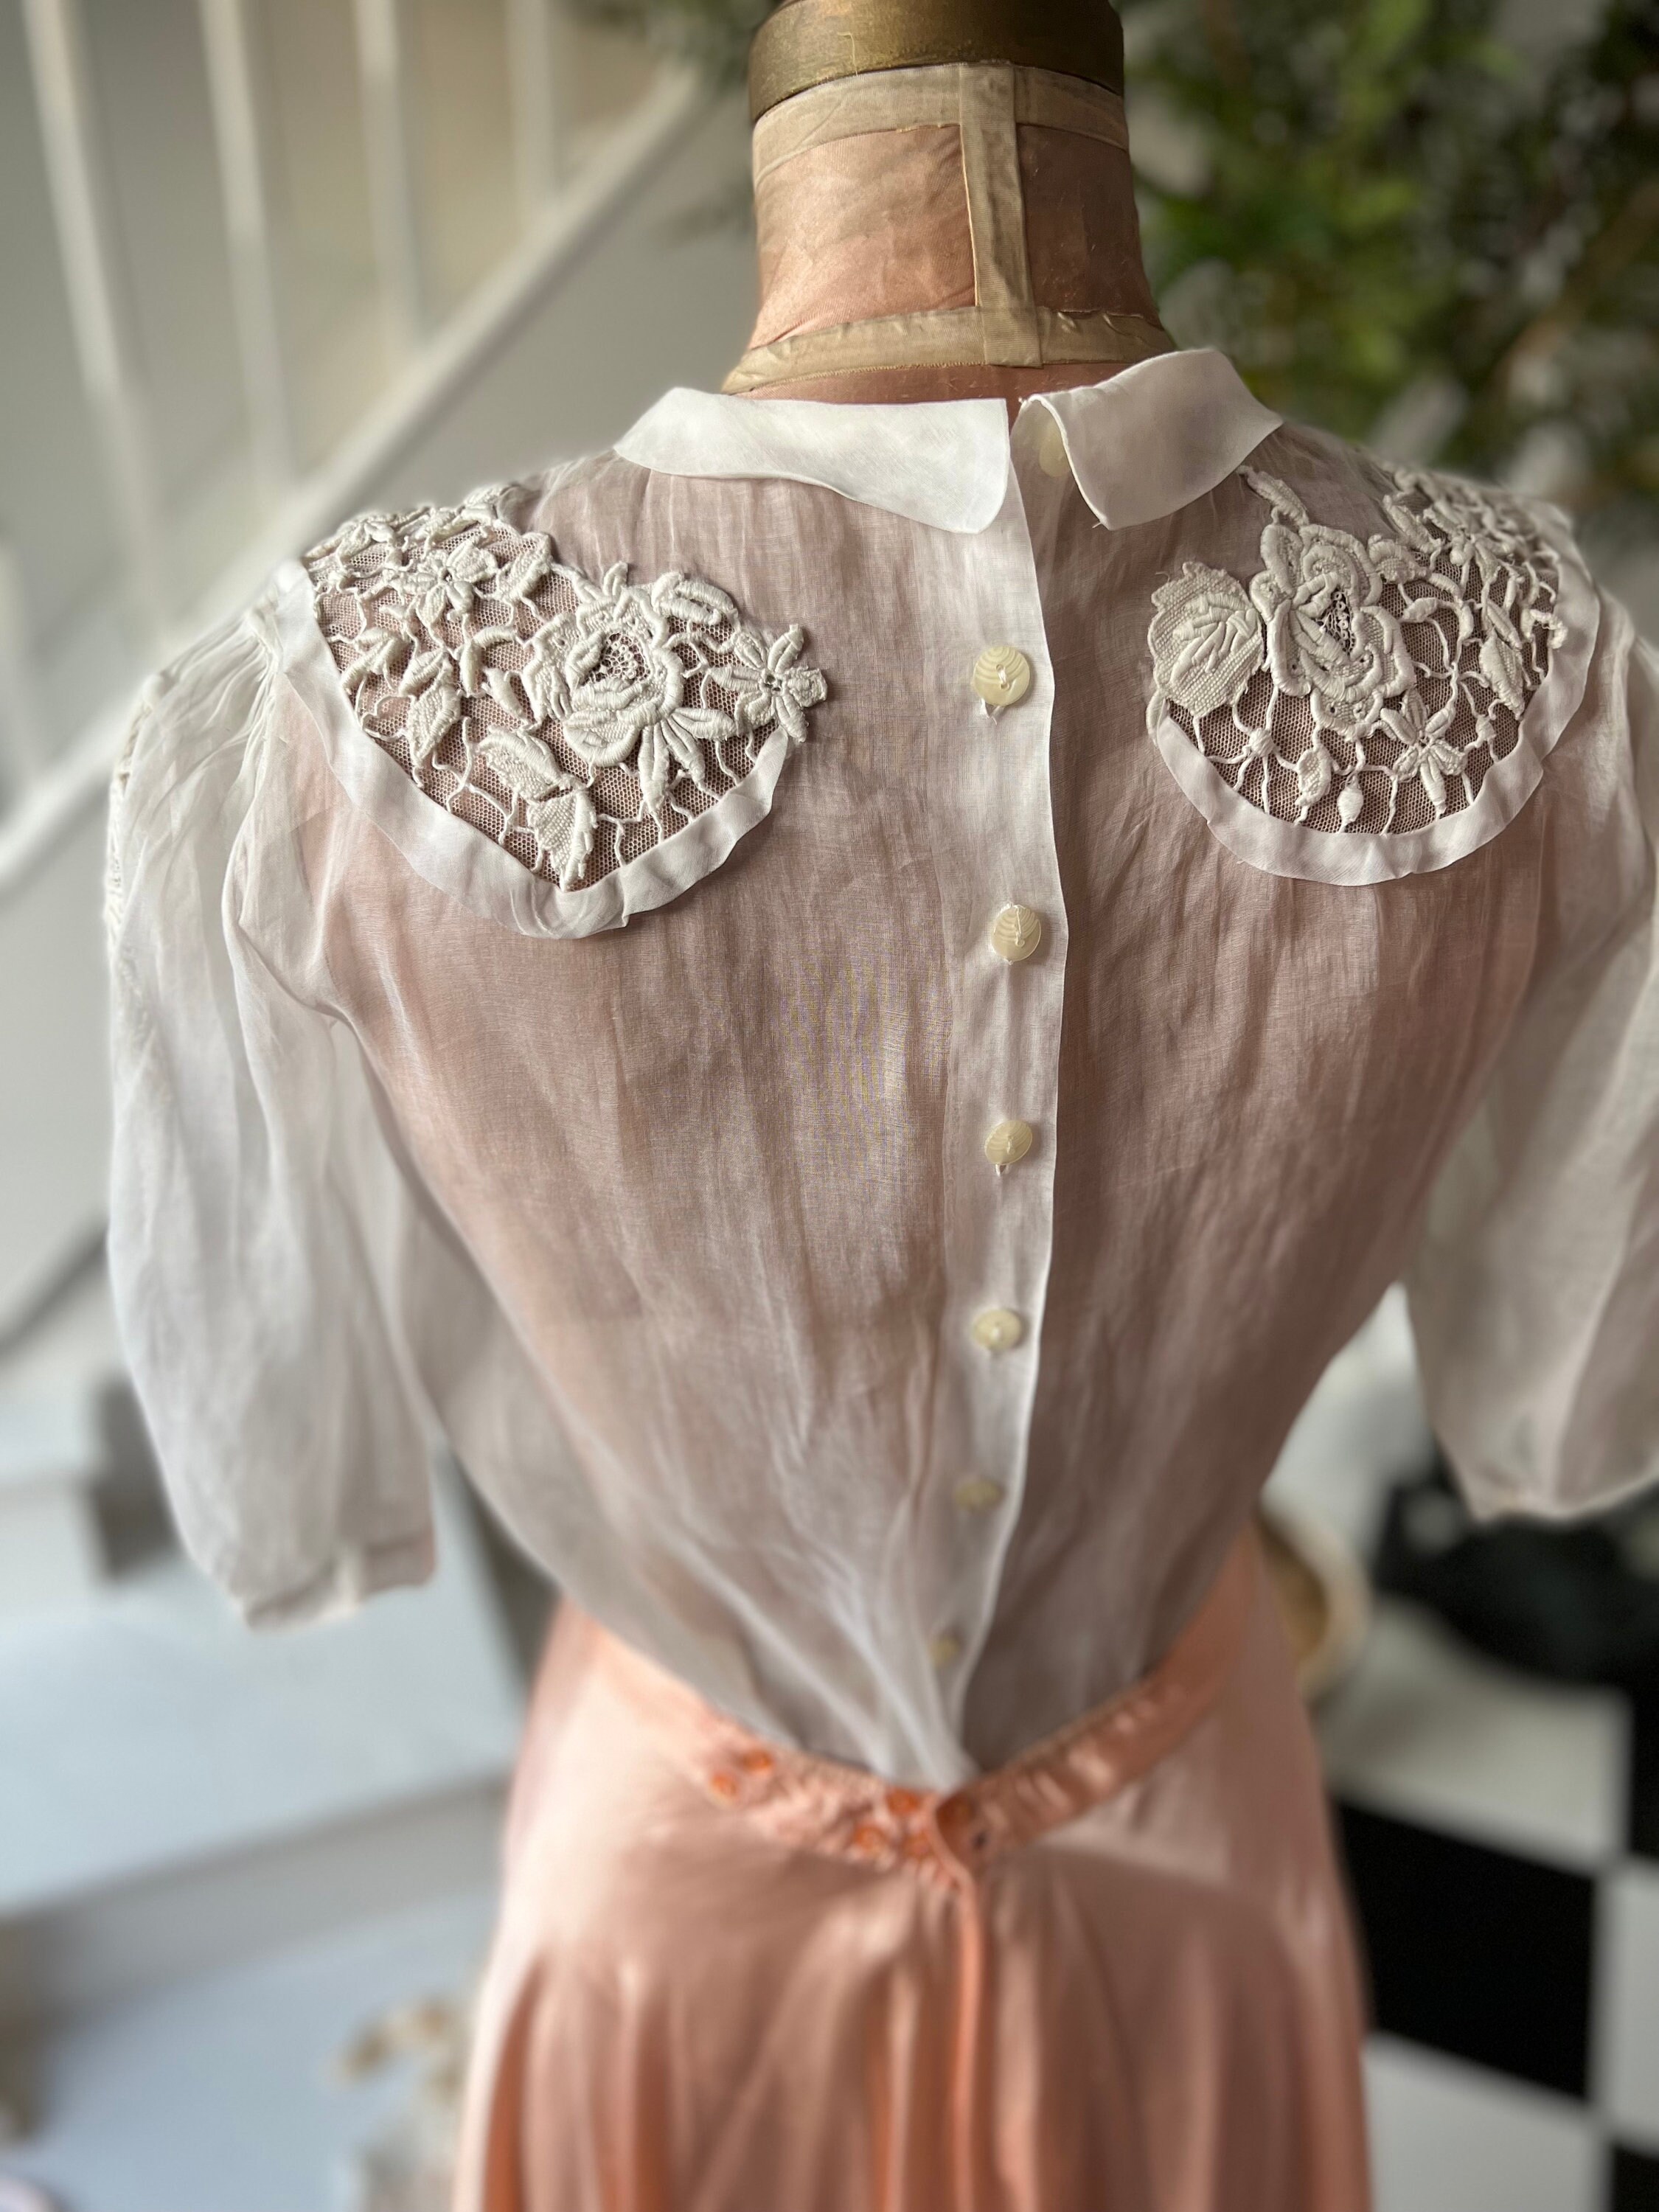 1930s 1940s White Organdie Blouse With Lace Details - Etsy UK